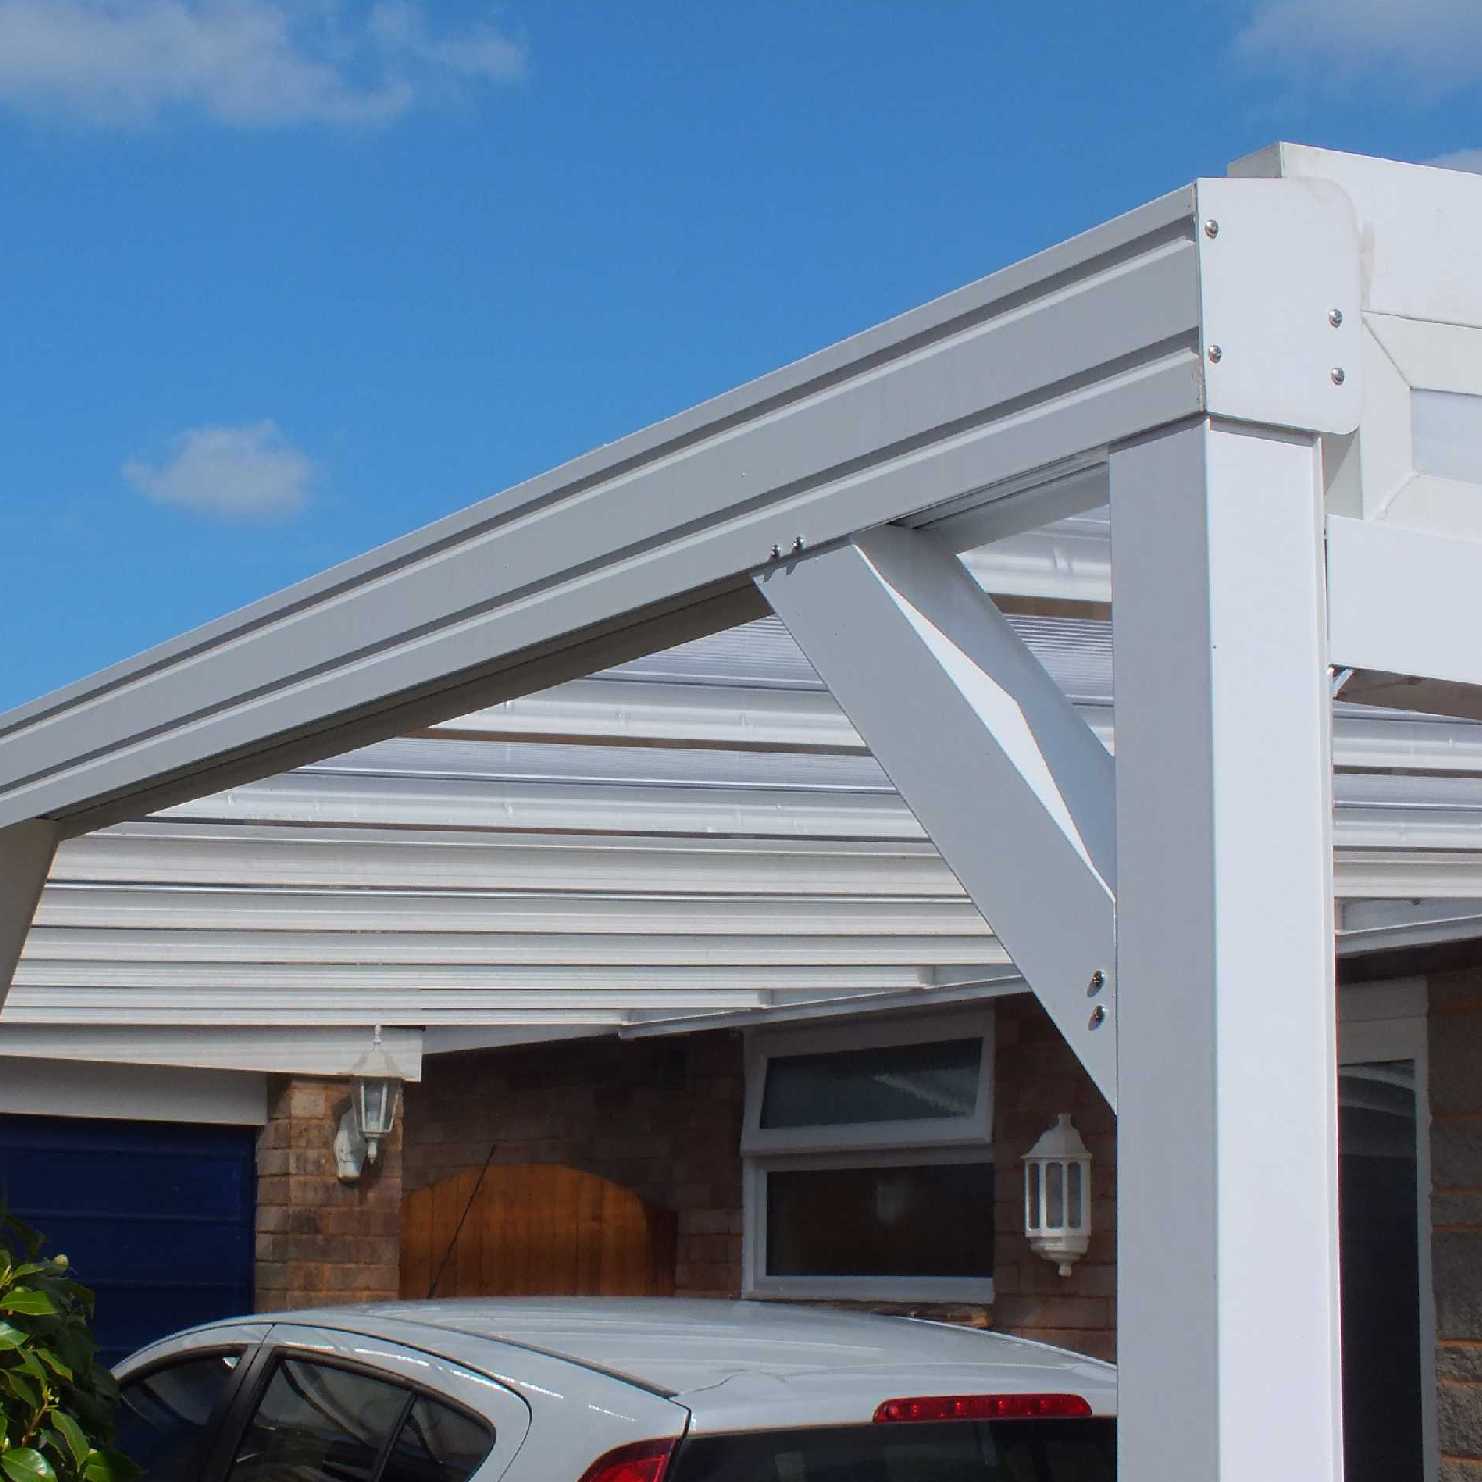 Buy Omega Smart Lean-To Canopy, White with 16mm Polycarbonate Glazing - 10.6m (W) x 3.0m (P), (5) Supporting Posts online today